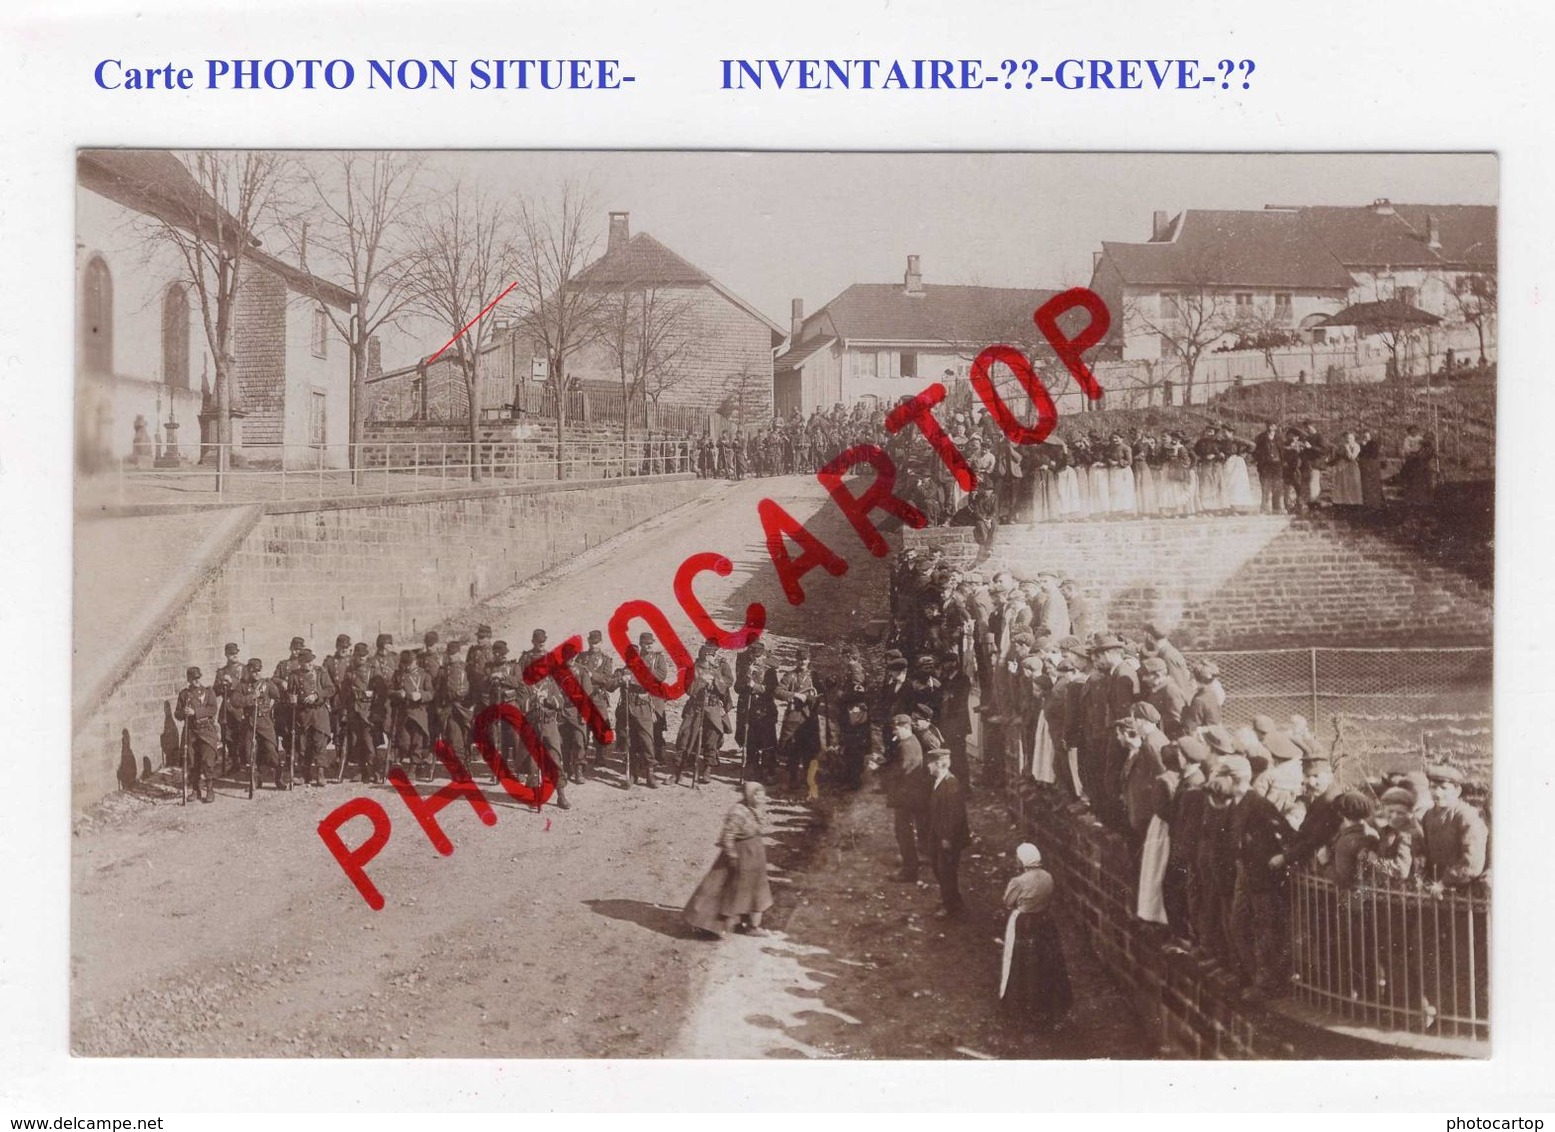 INVENTAIRE-GREVE-??-ARMEE-CARTE PHOTO Francaise NON SITUEE-FRANCE- - Grèves